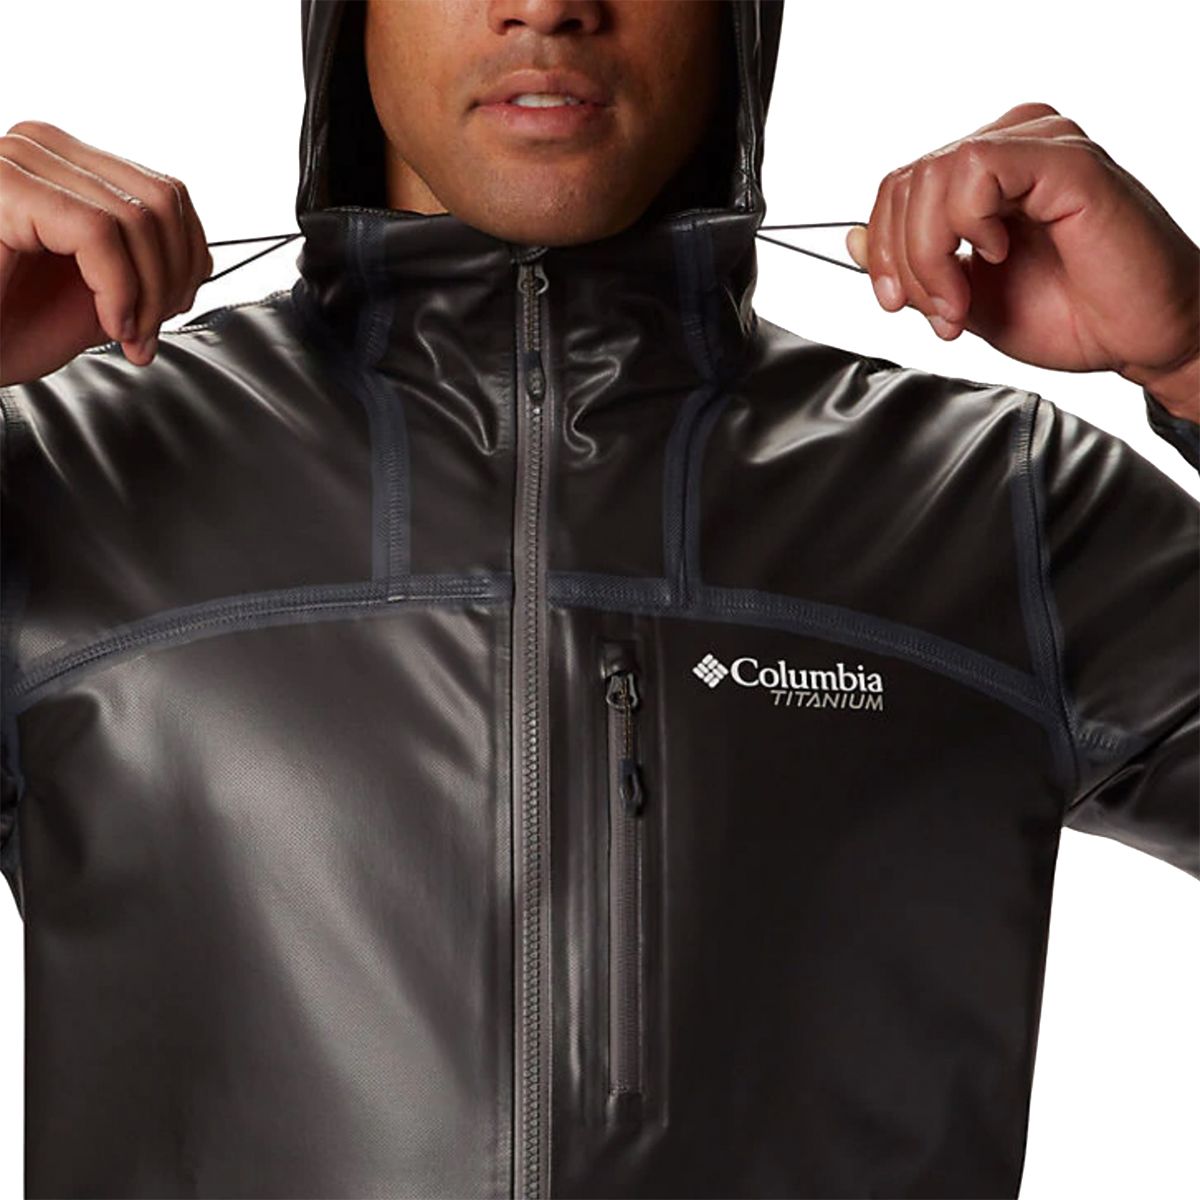 men's outdry ex stretch hooded shell